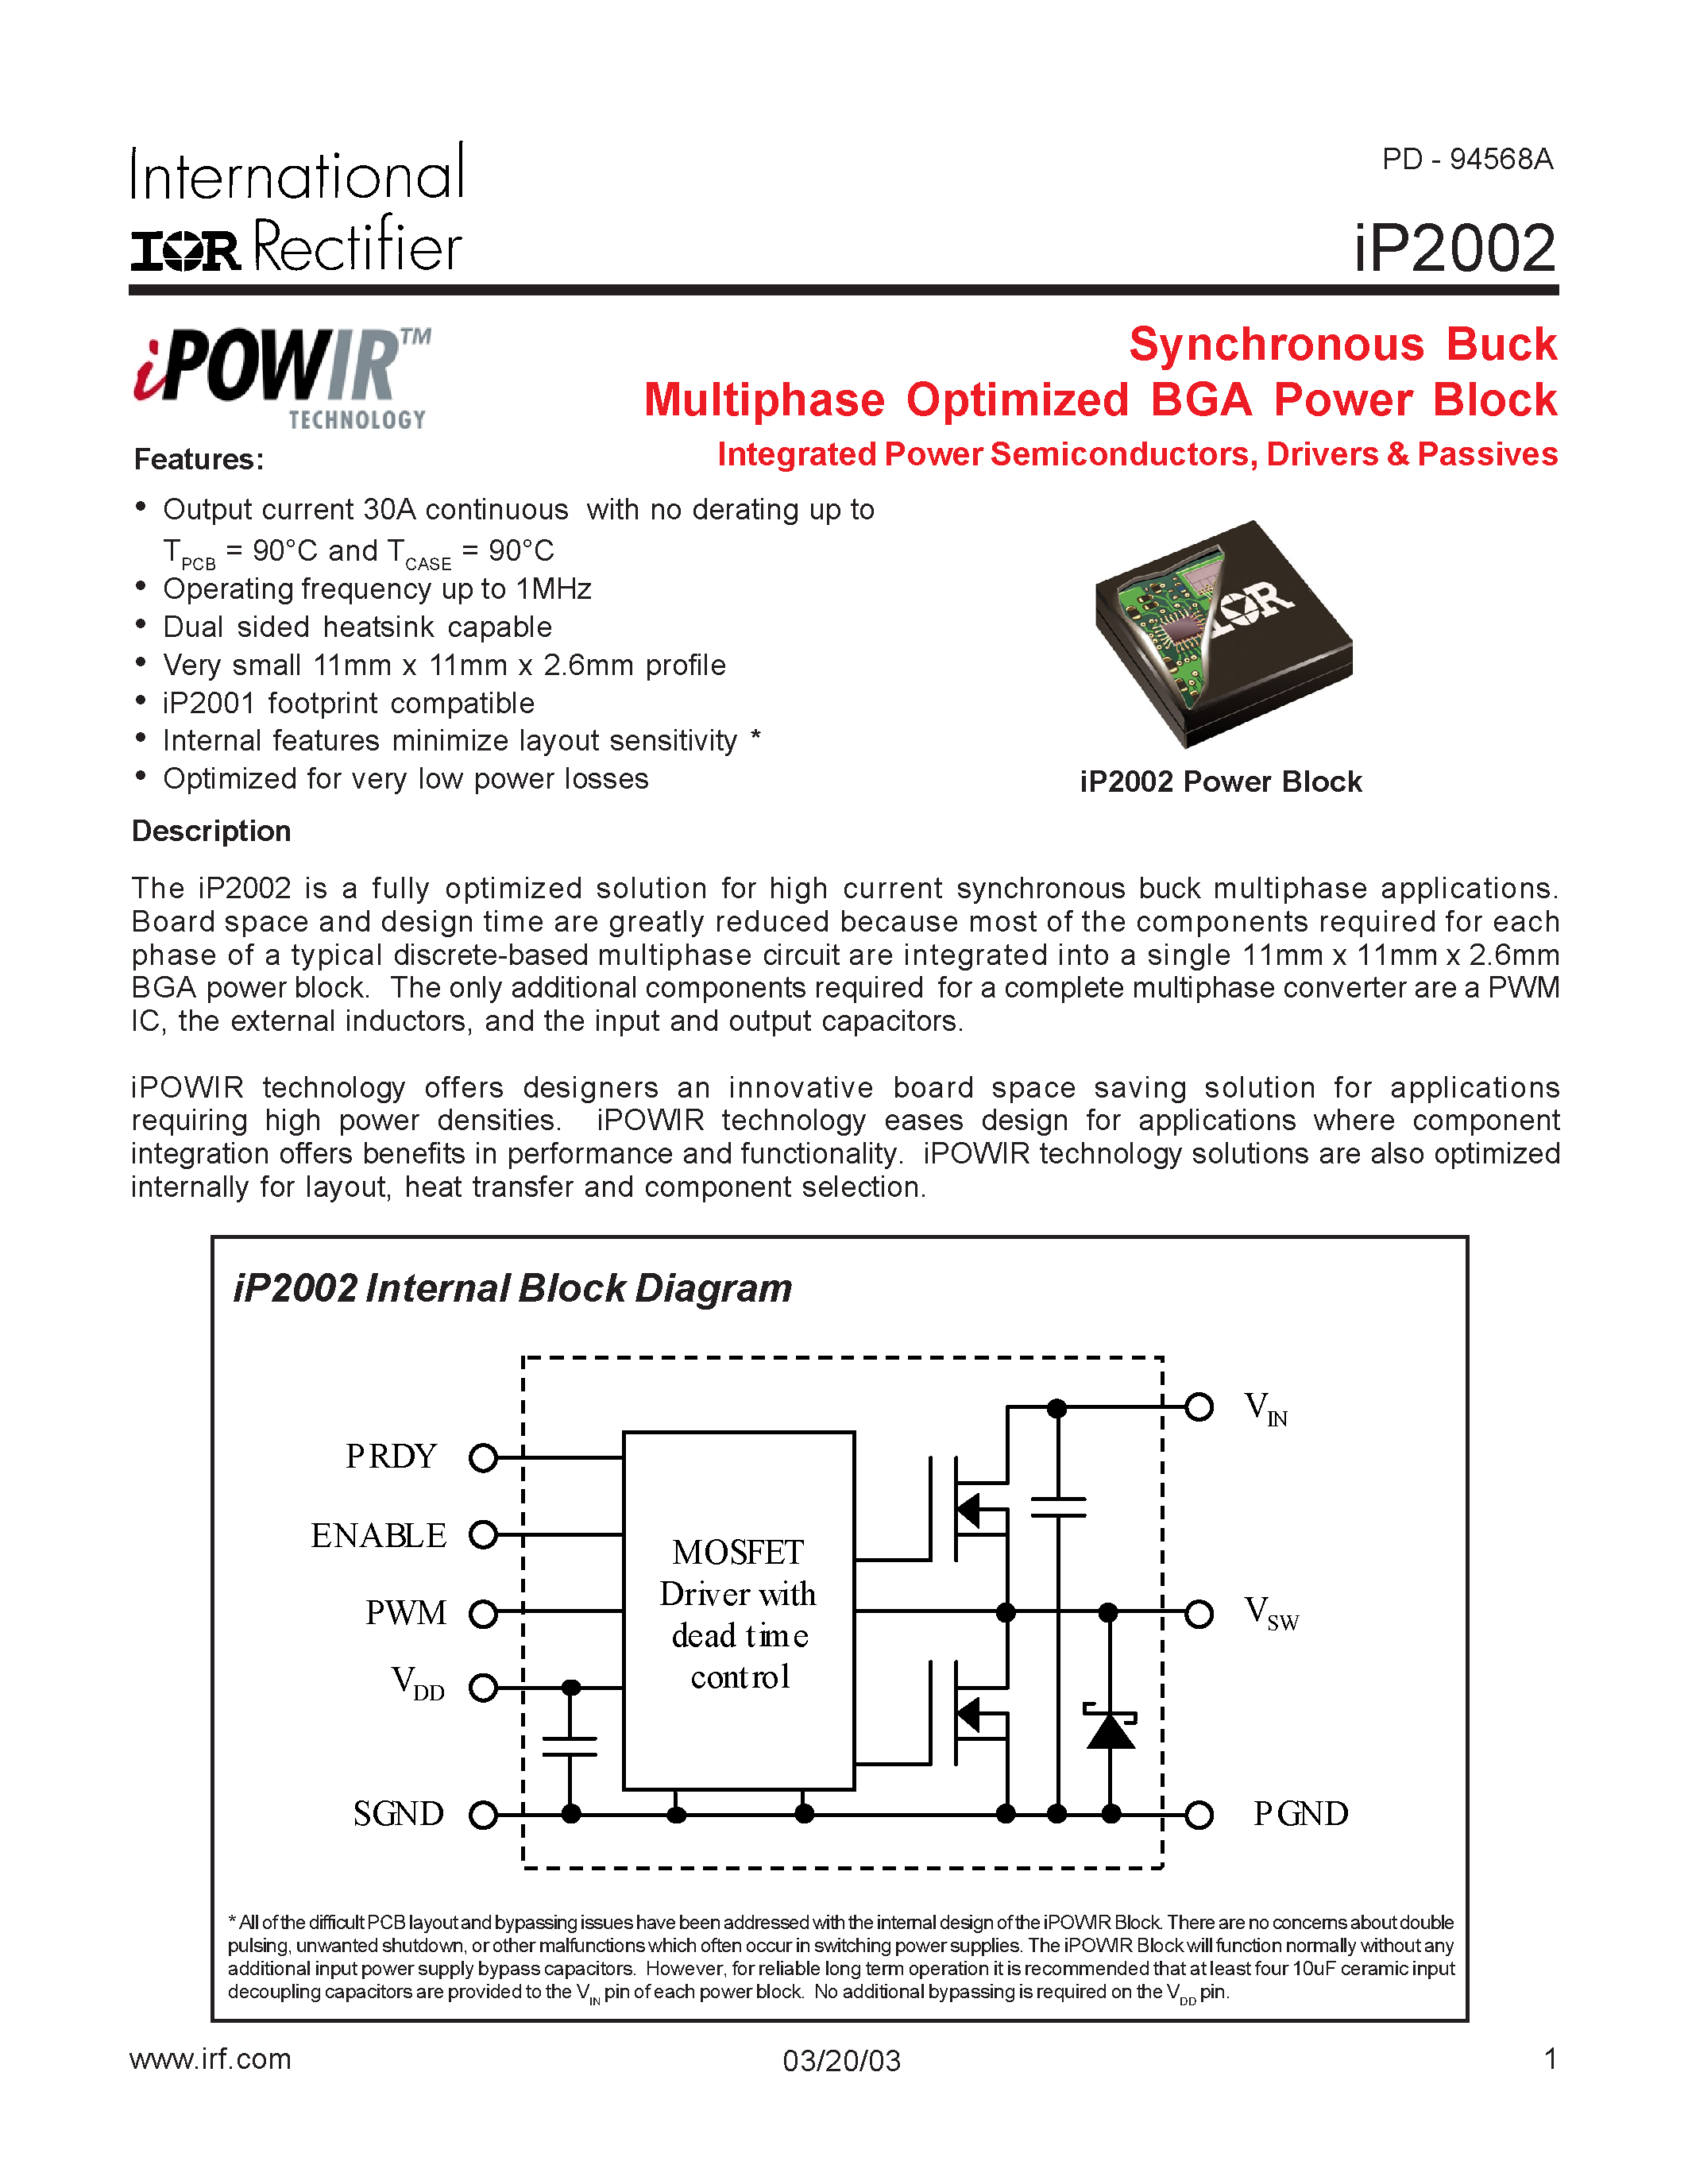 Даташит IP2002 - Synchronous Buck Synchronous Buck Integrated Power Semiconductors/ Drivers & Passives страница 1